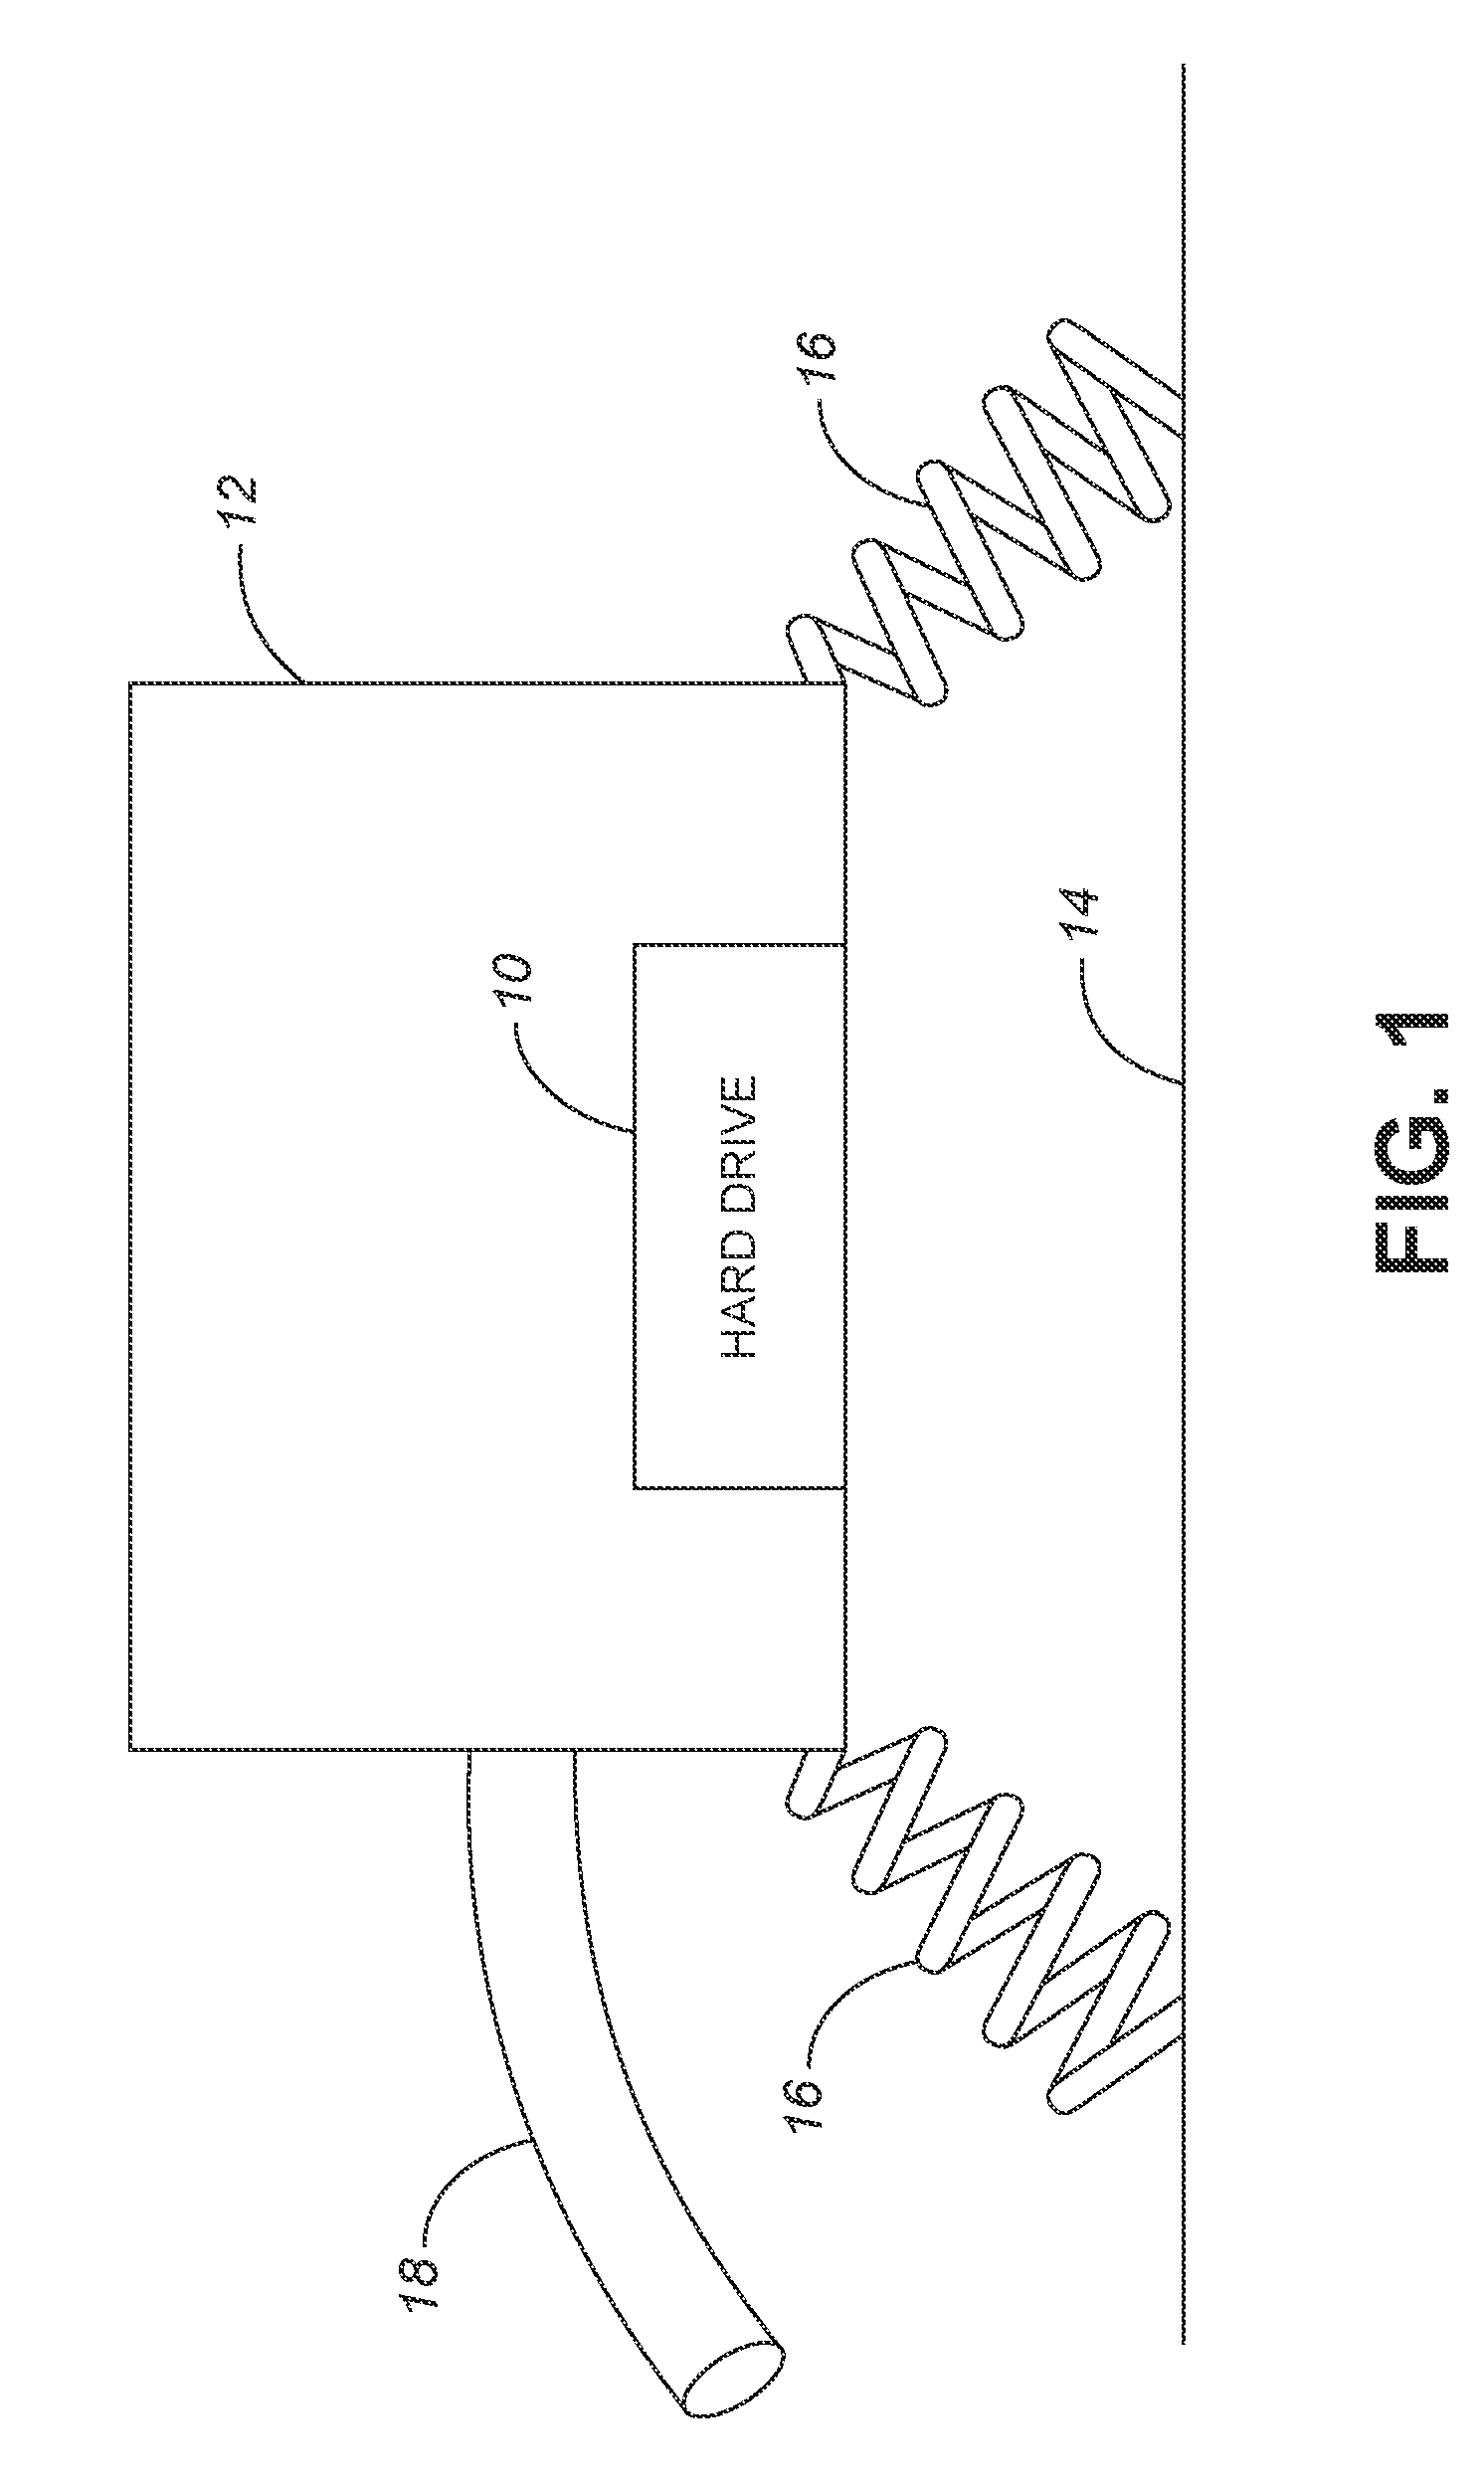 Mobile event data recorder with multiple orientation vibration isolation